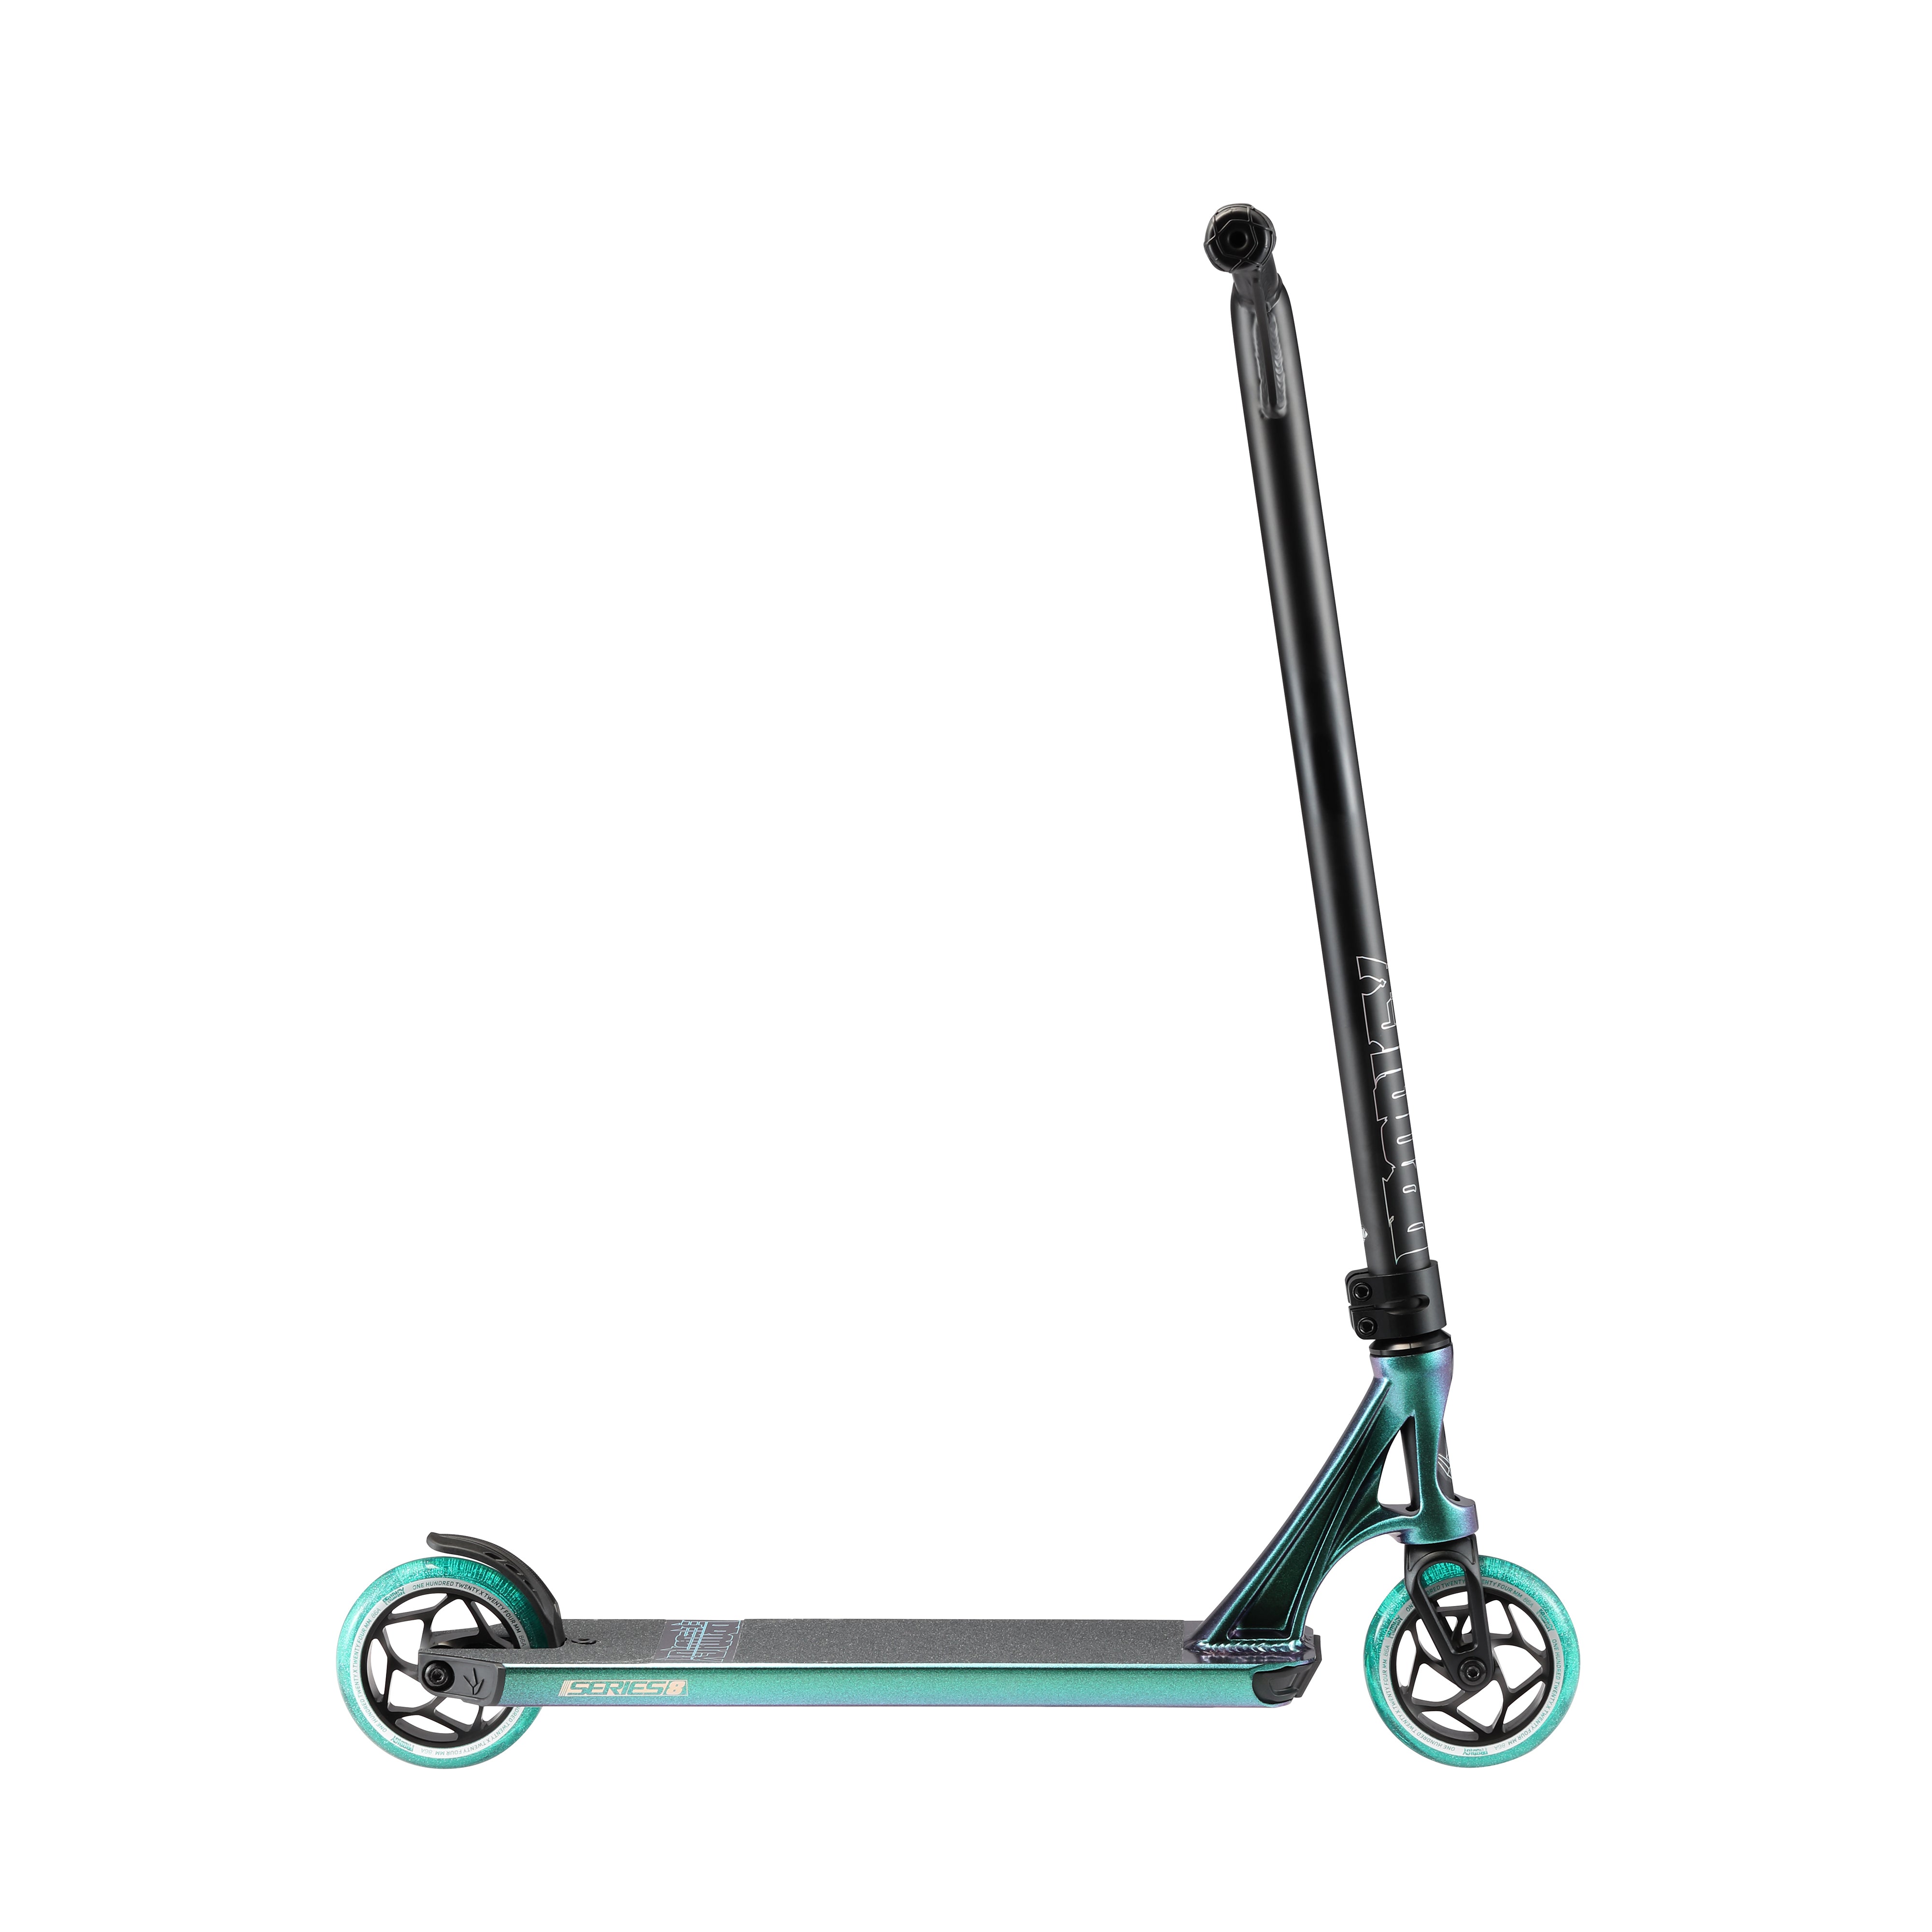 Envy Prodigy S8 - Scooter Complete Jade Left Side View